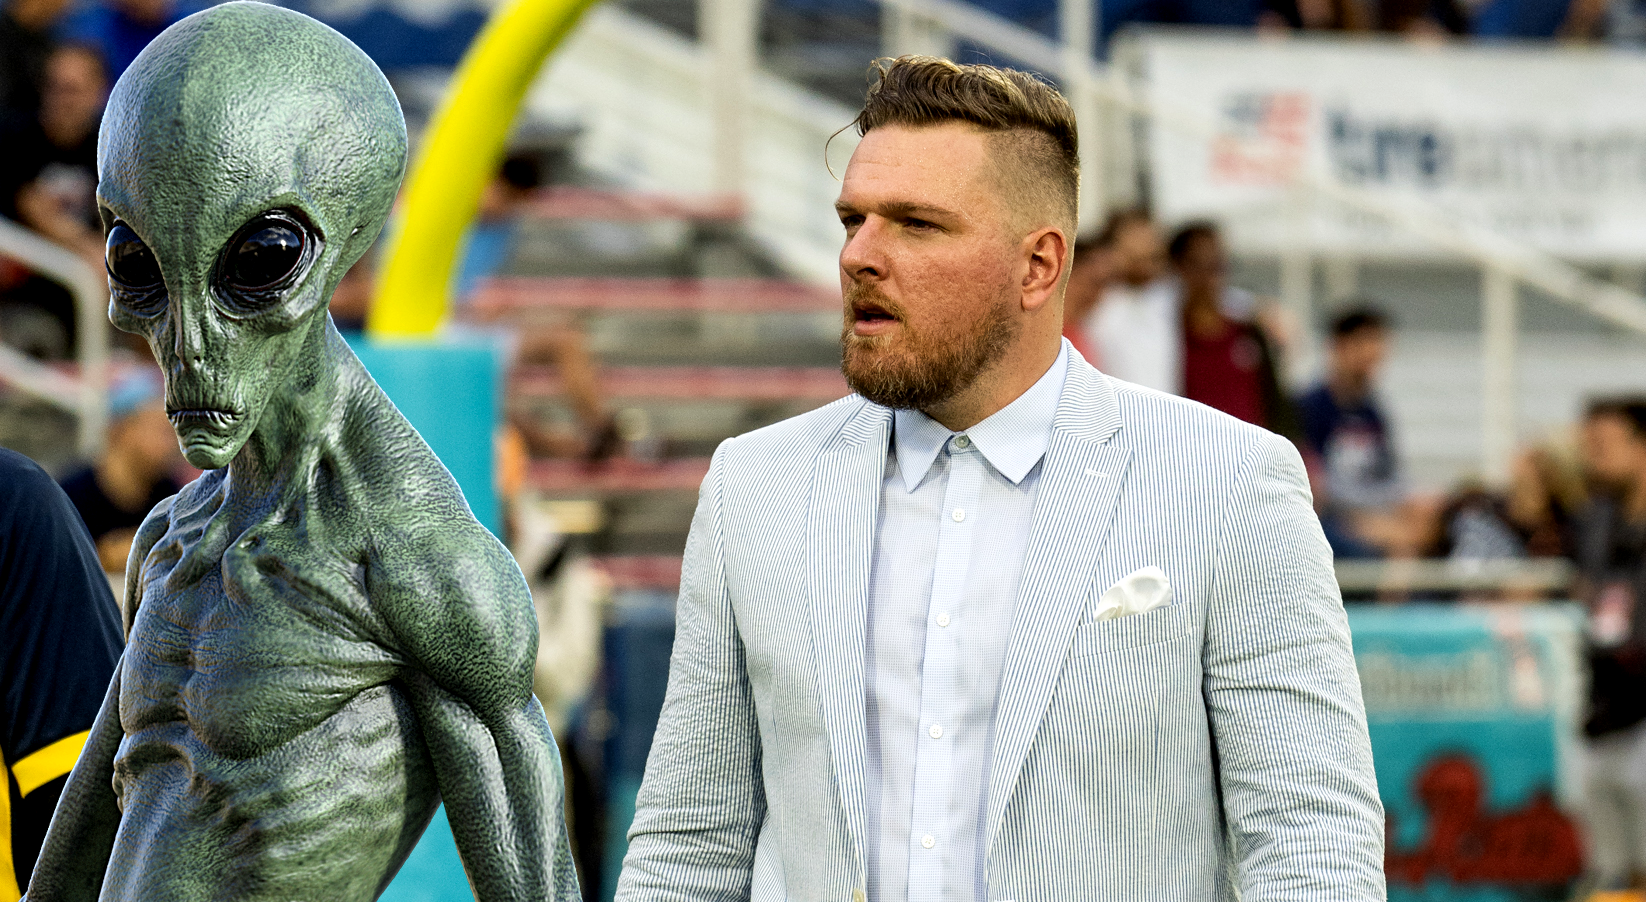 Pat McAfee Shares Wild Story About Seeing A UFO: 'I Can't Wait For People To See This'